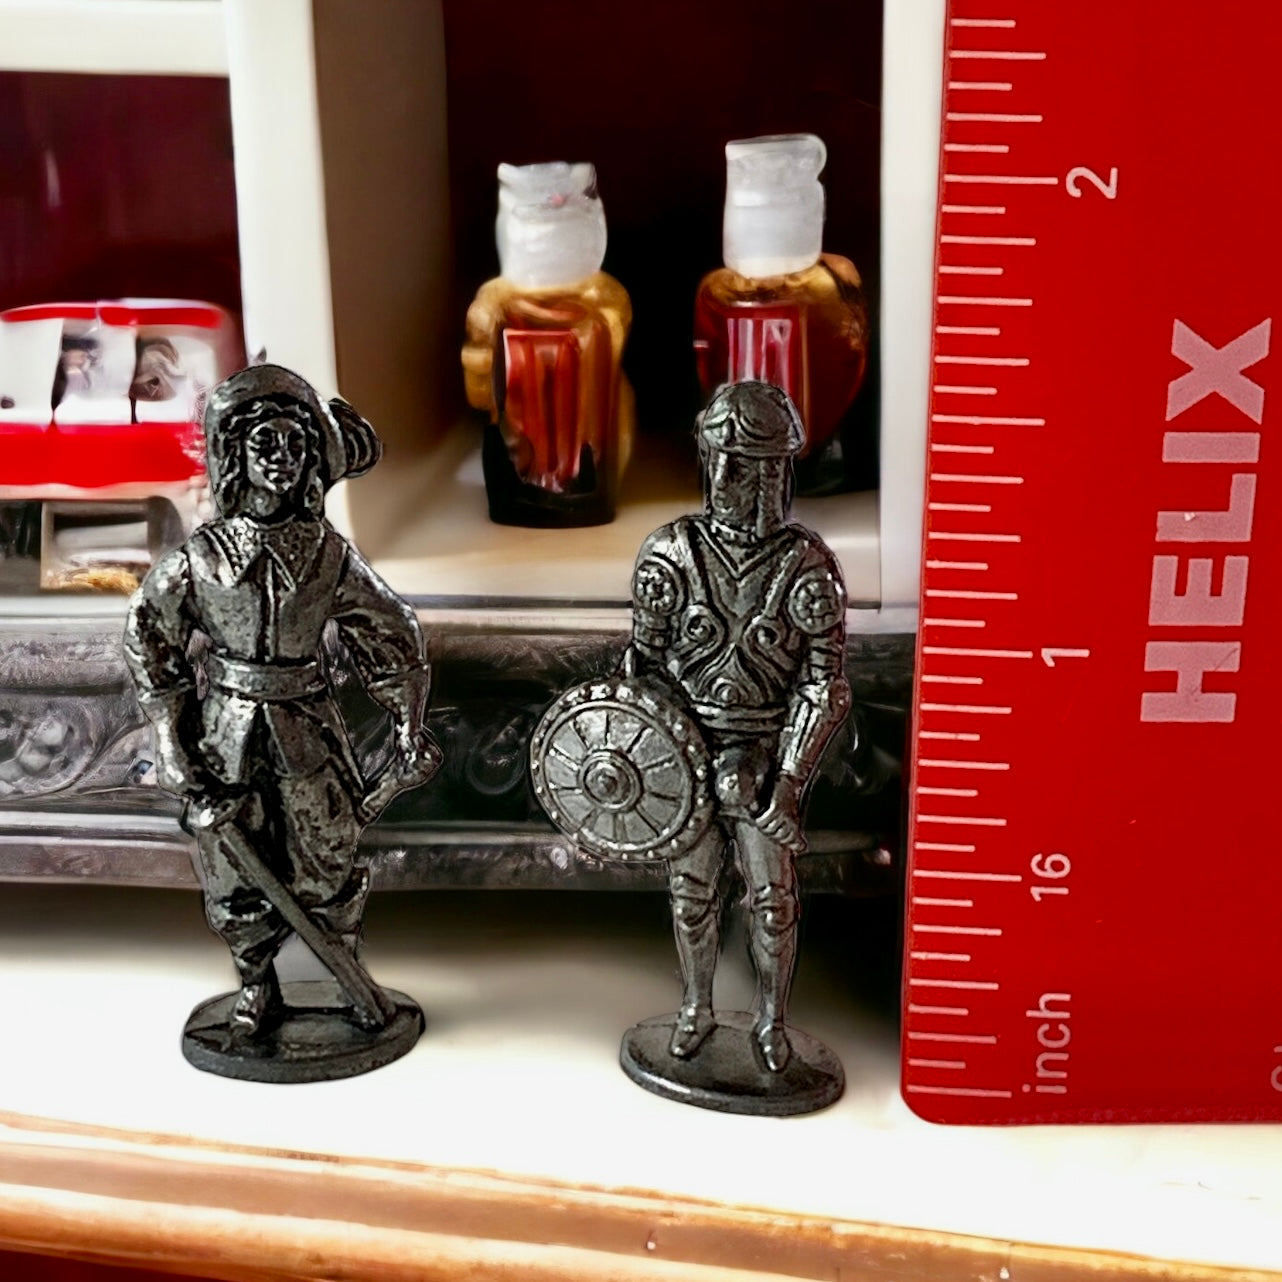 Set Of Two Miniature Pewter Figurines